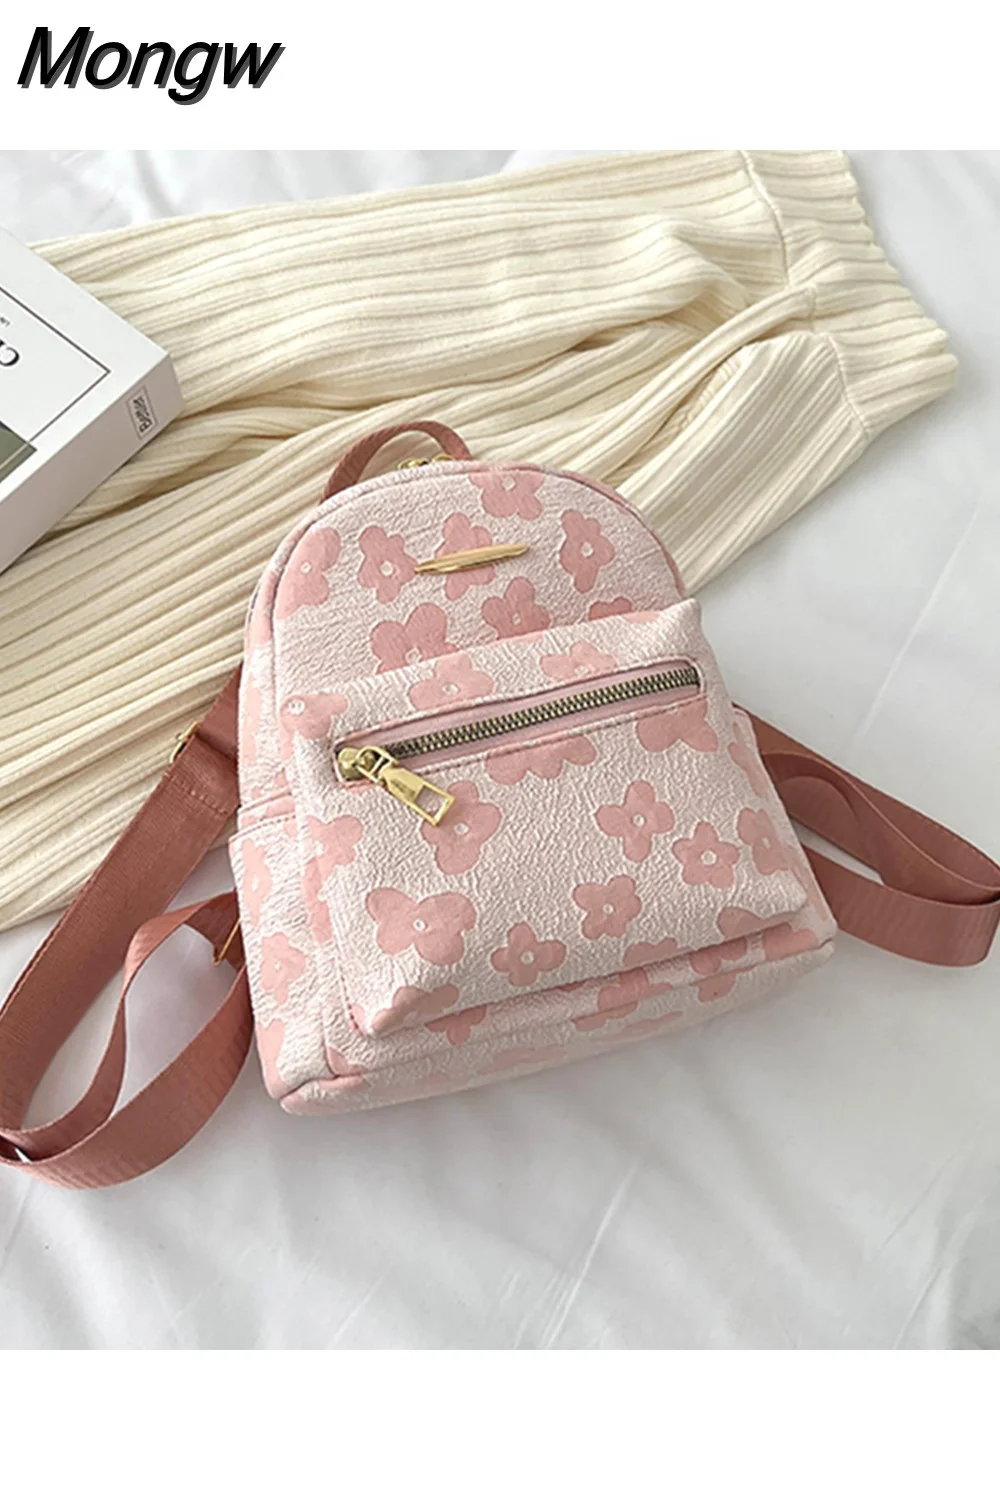 Mongw Flower Printing Fashion Backpacks Solid Color Small School Bags for Teenager Girls Canvas Female Shoulder Bags Rucksack